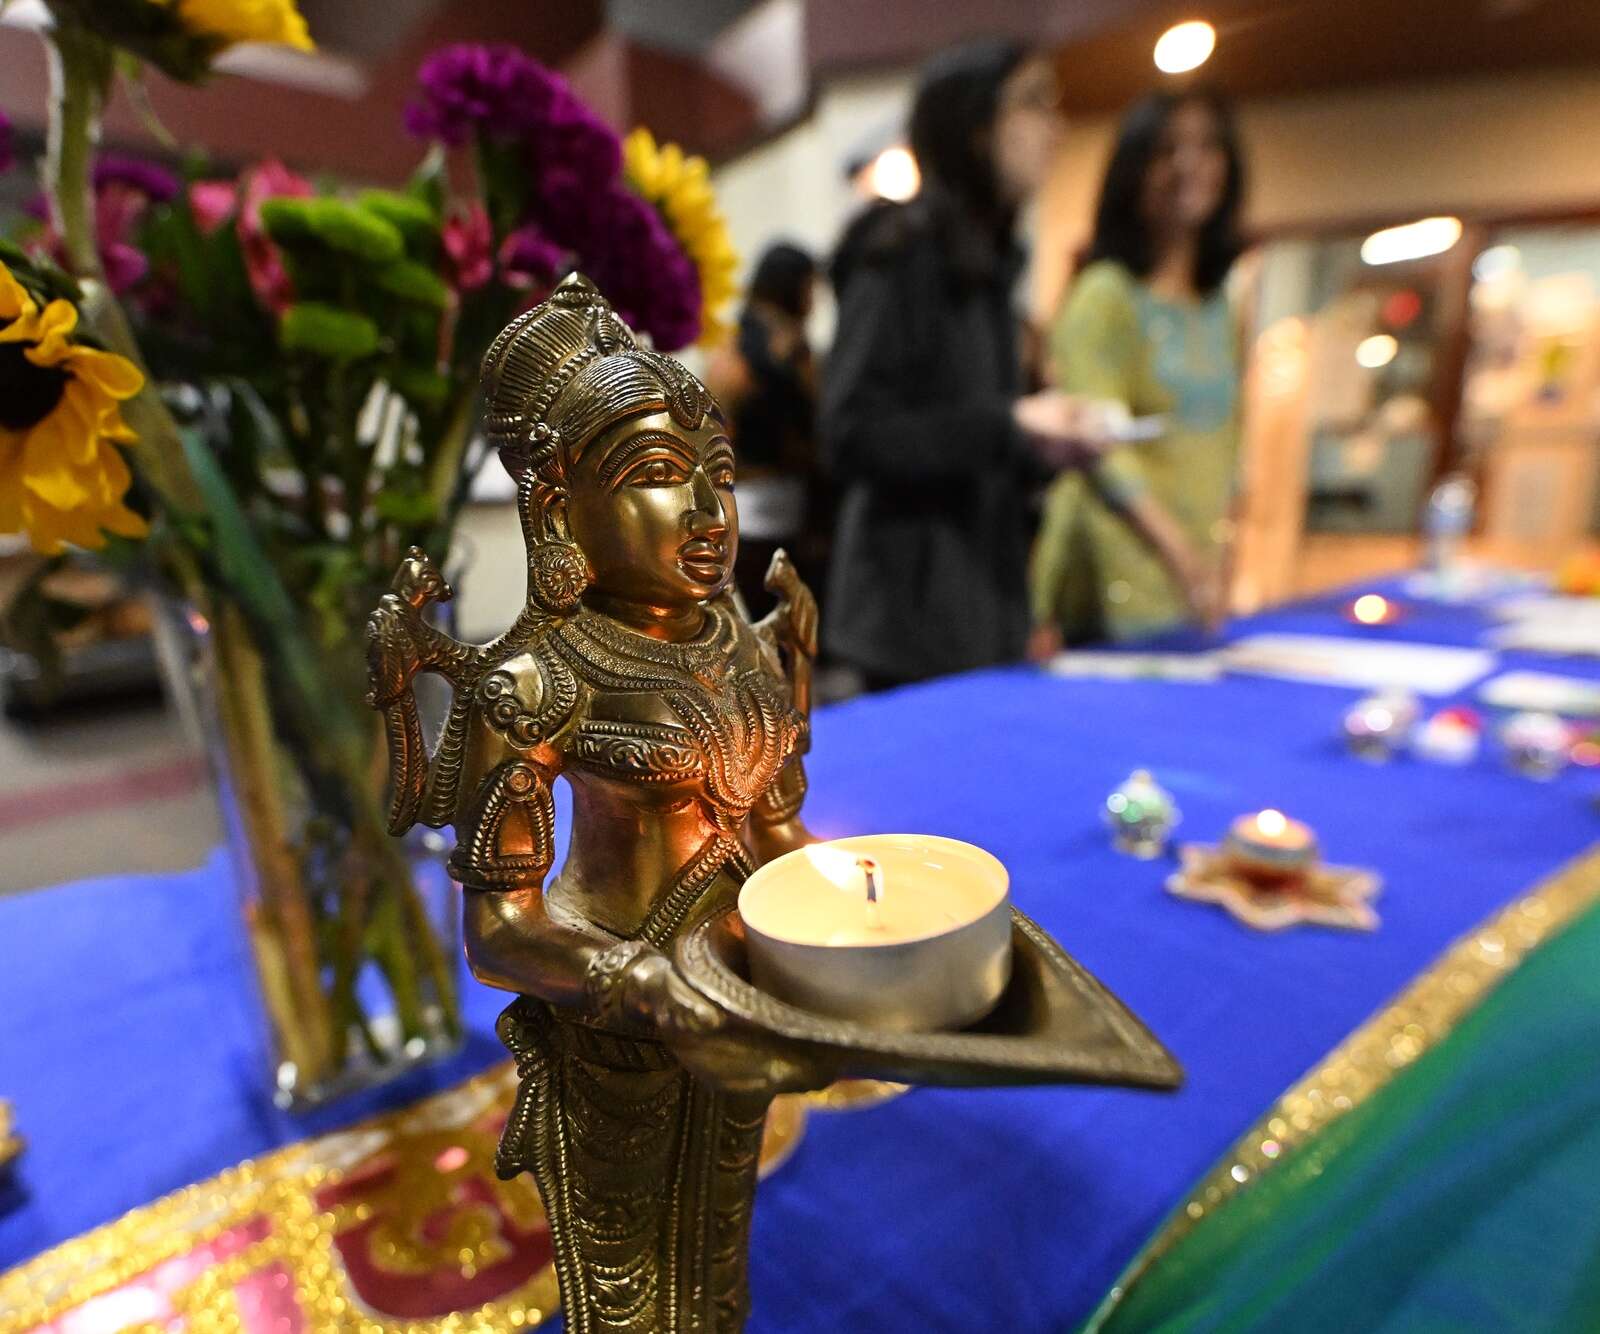 A Indian princess statue holds a candle